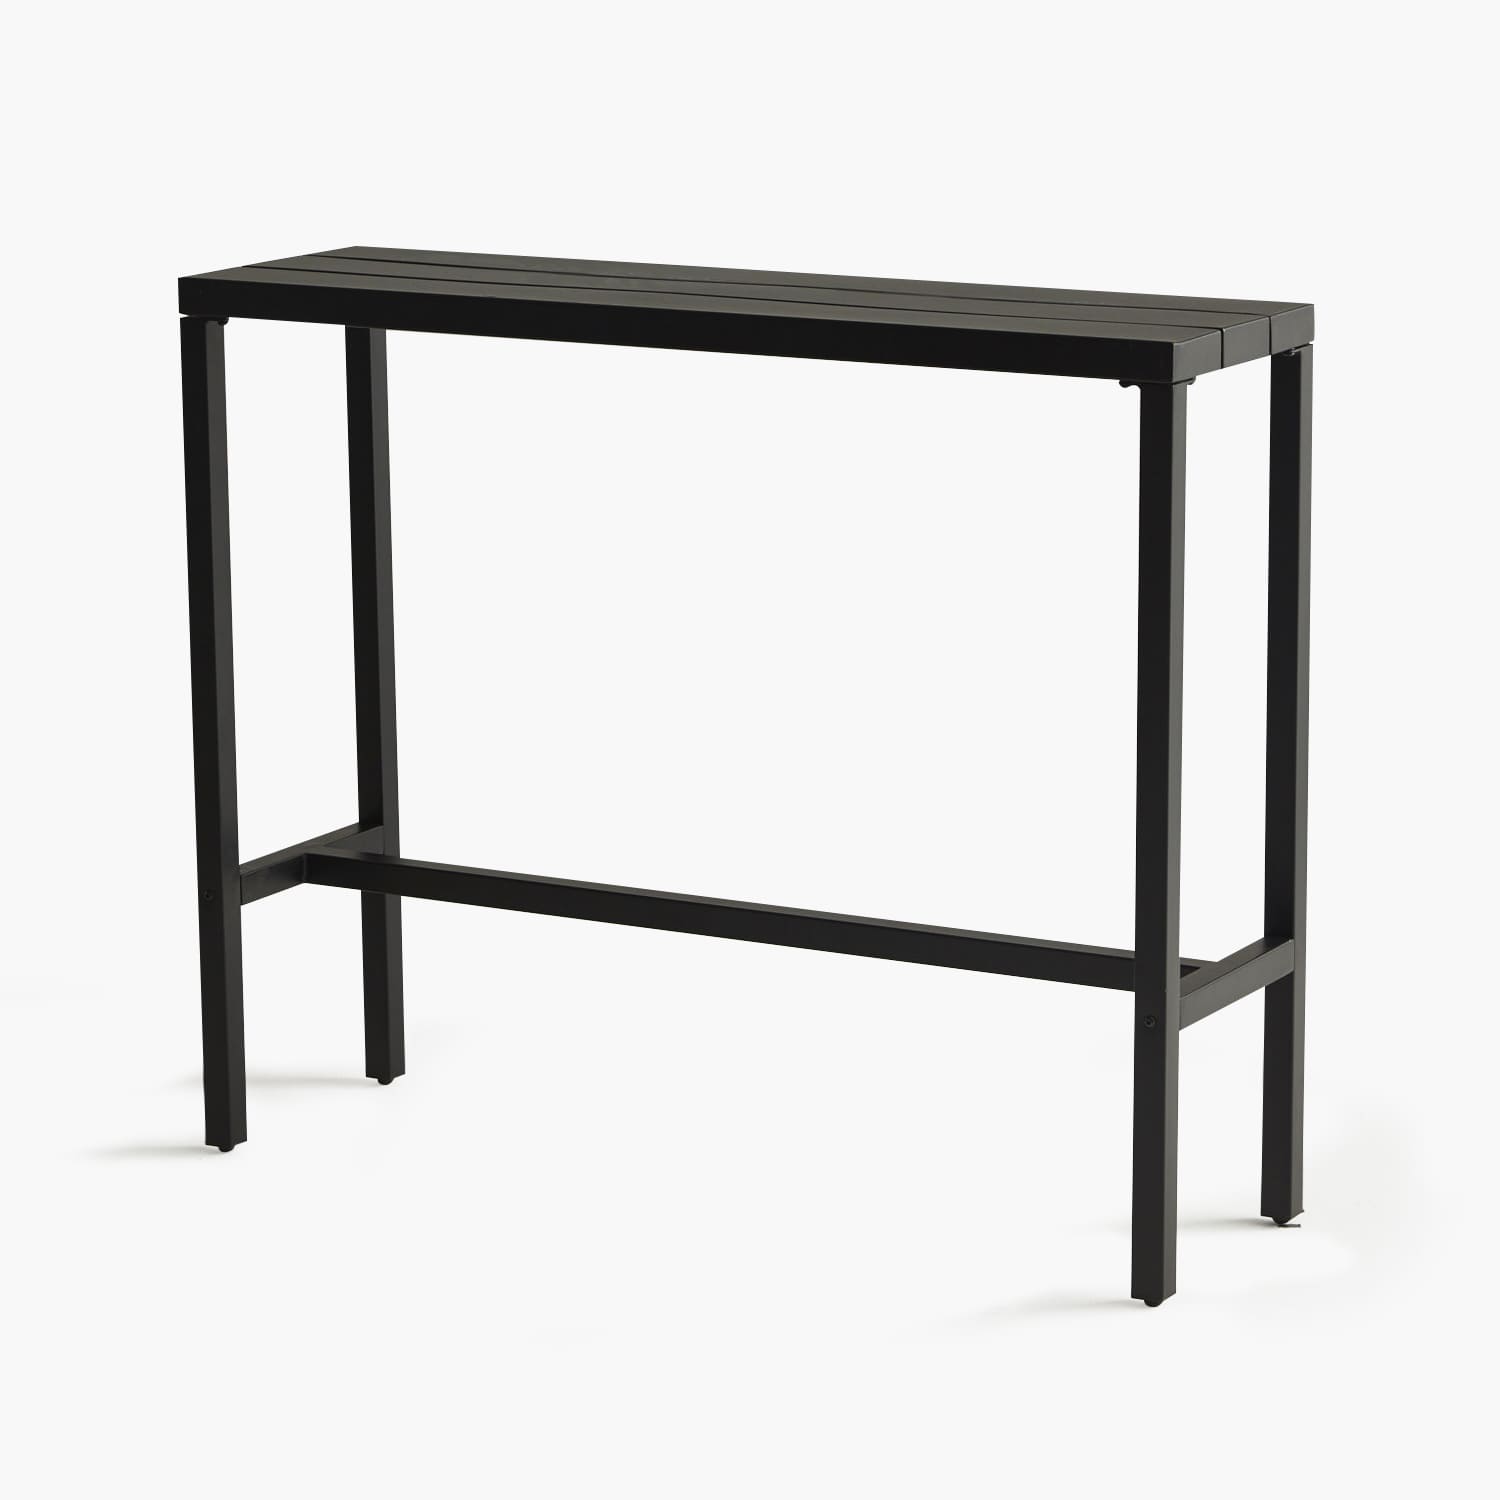 black outdoor bar height table